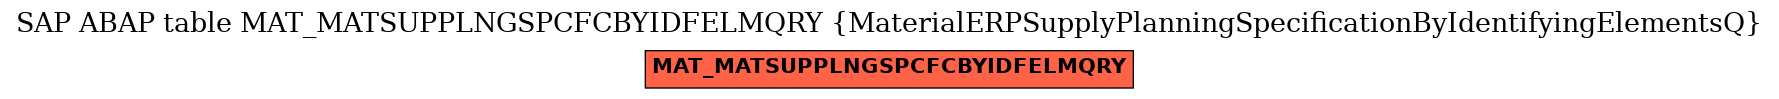 E-R Diagram for table MAT_MATSUPPLNGSPCFCBYIDFELMQRY (MaterialERPSupplyPlanningSpecificationByIdentifyingElementsQ)